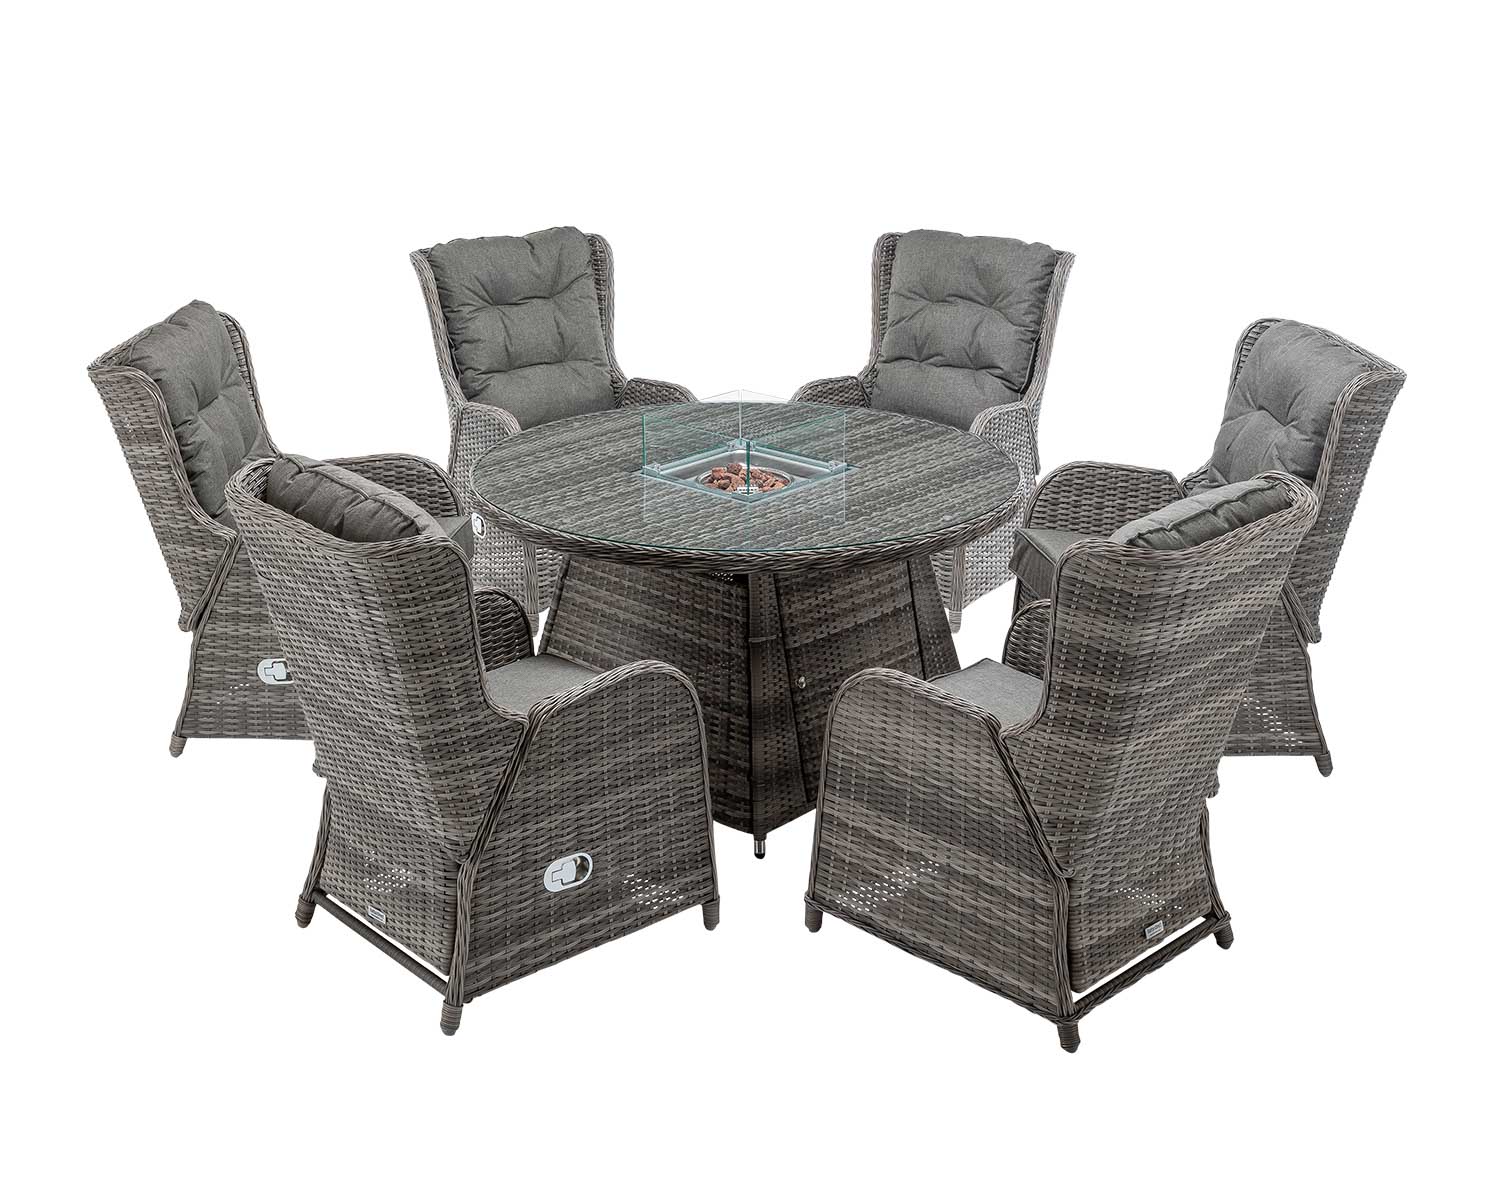 6 Reclining Rattan Garden Chairs Amp Round Fire Pit Dining Table In Grey Fiji Rattan Direct